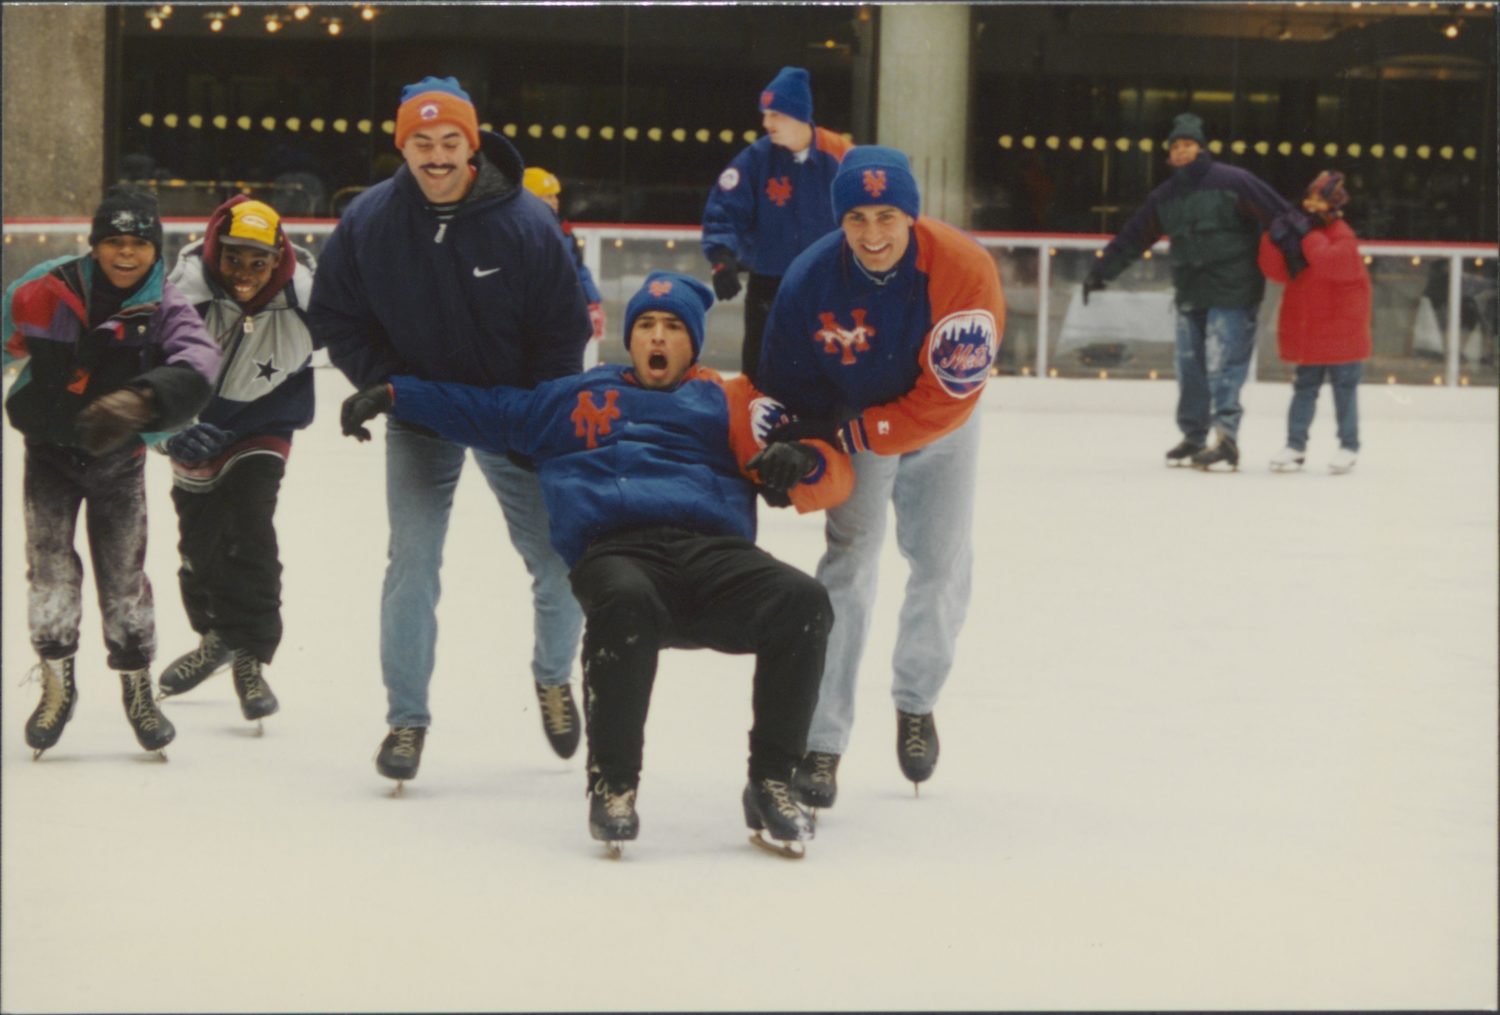 John Franco & Mets Players Join Fans on the Ice